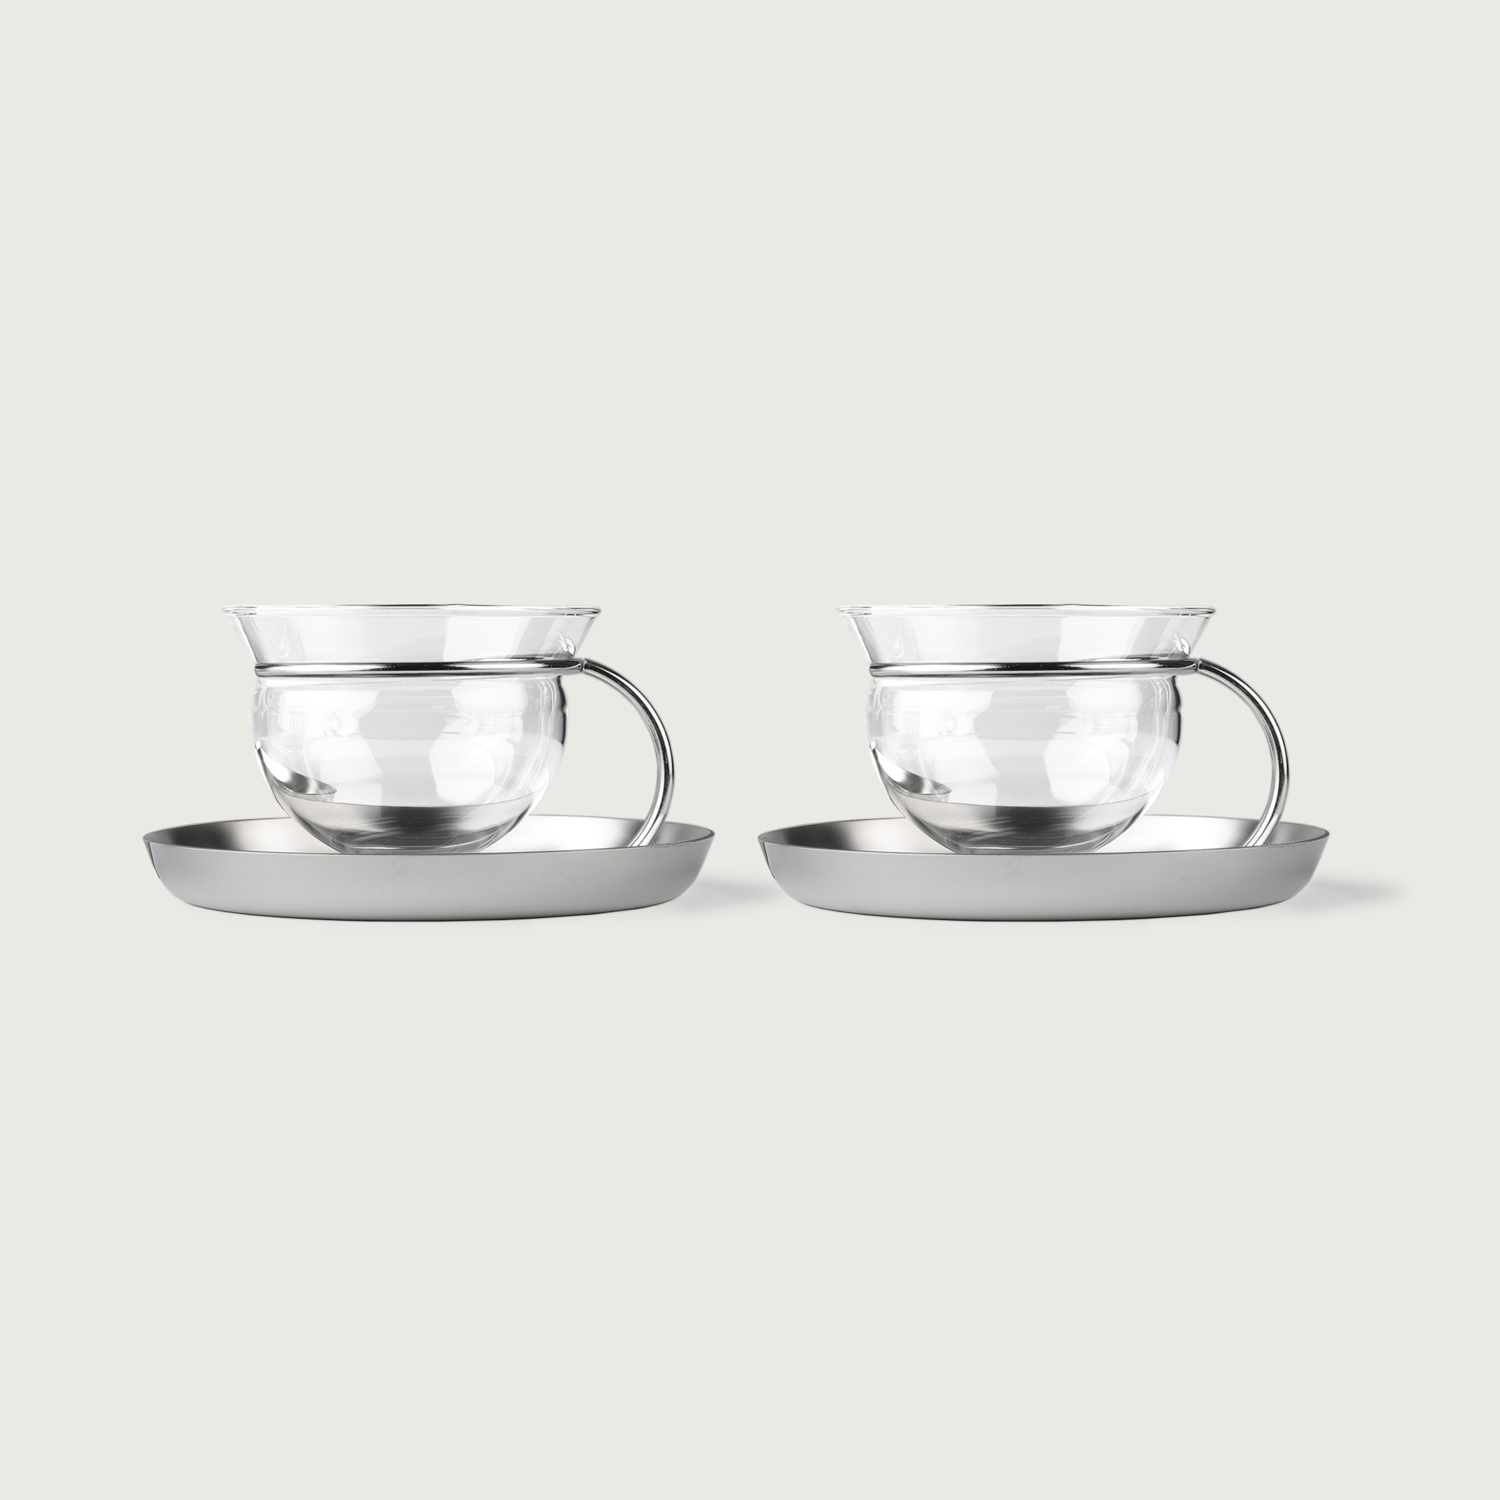 Mono Filio Teacups 2er-Set with Saucers from glass and stainless steel with 20% 